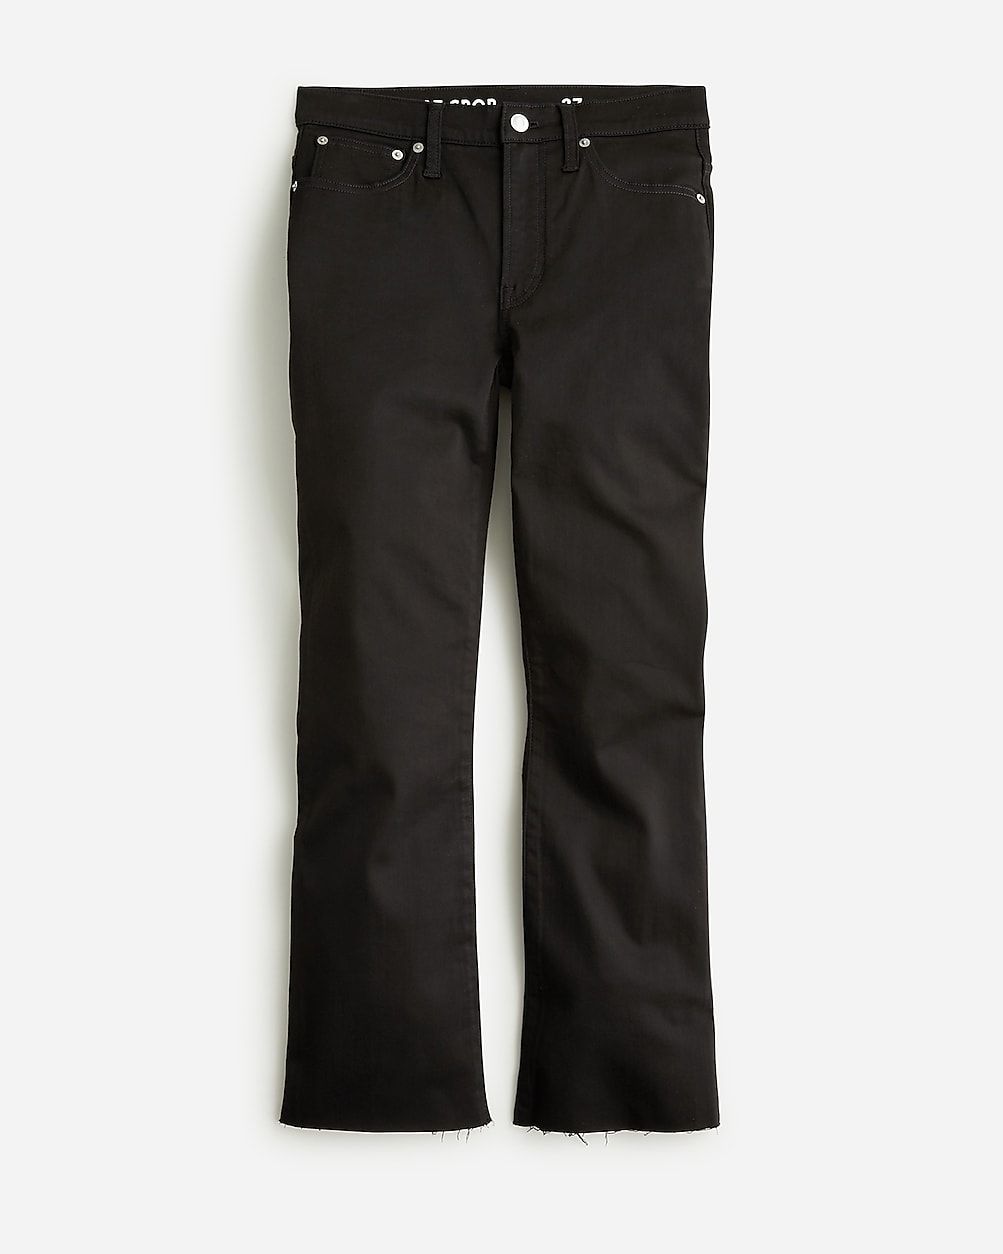 top rated4.5(185 REVIEWS)9" demi-boot crop jean in Stay Black wash$74.50$128.00 (42% Off)Limited ... | J.Crew US